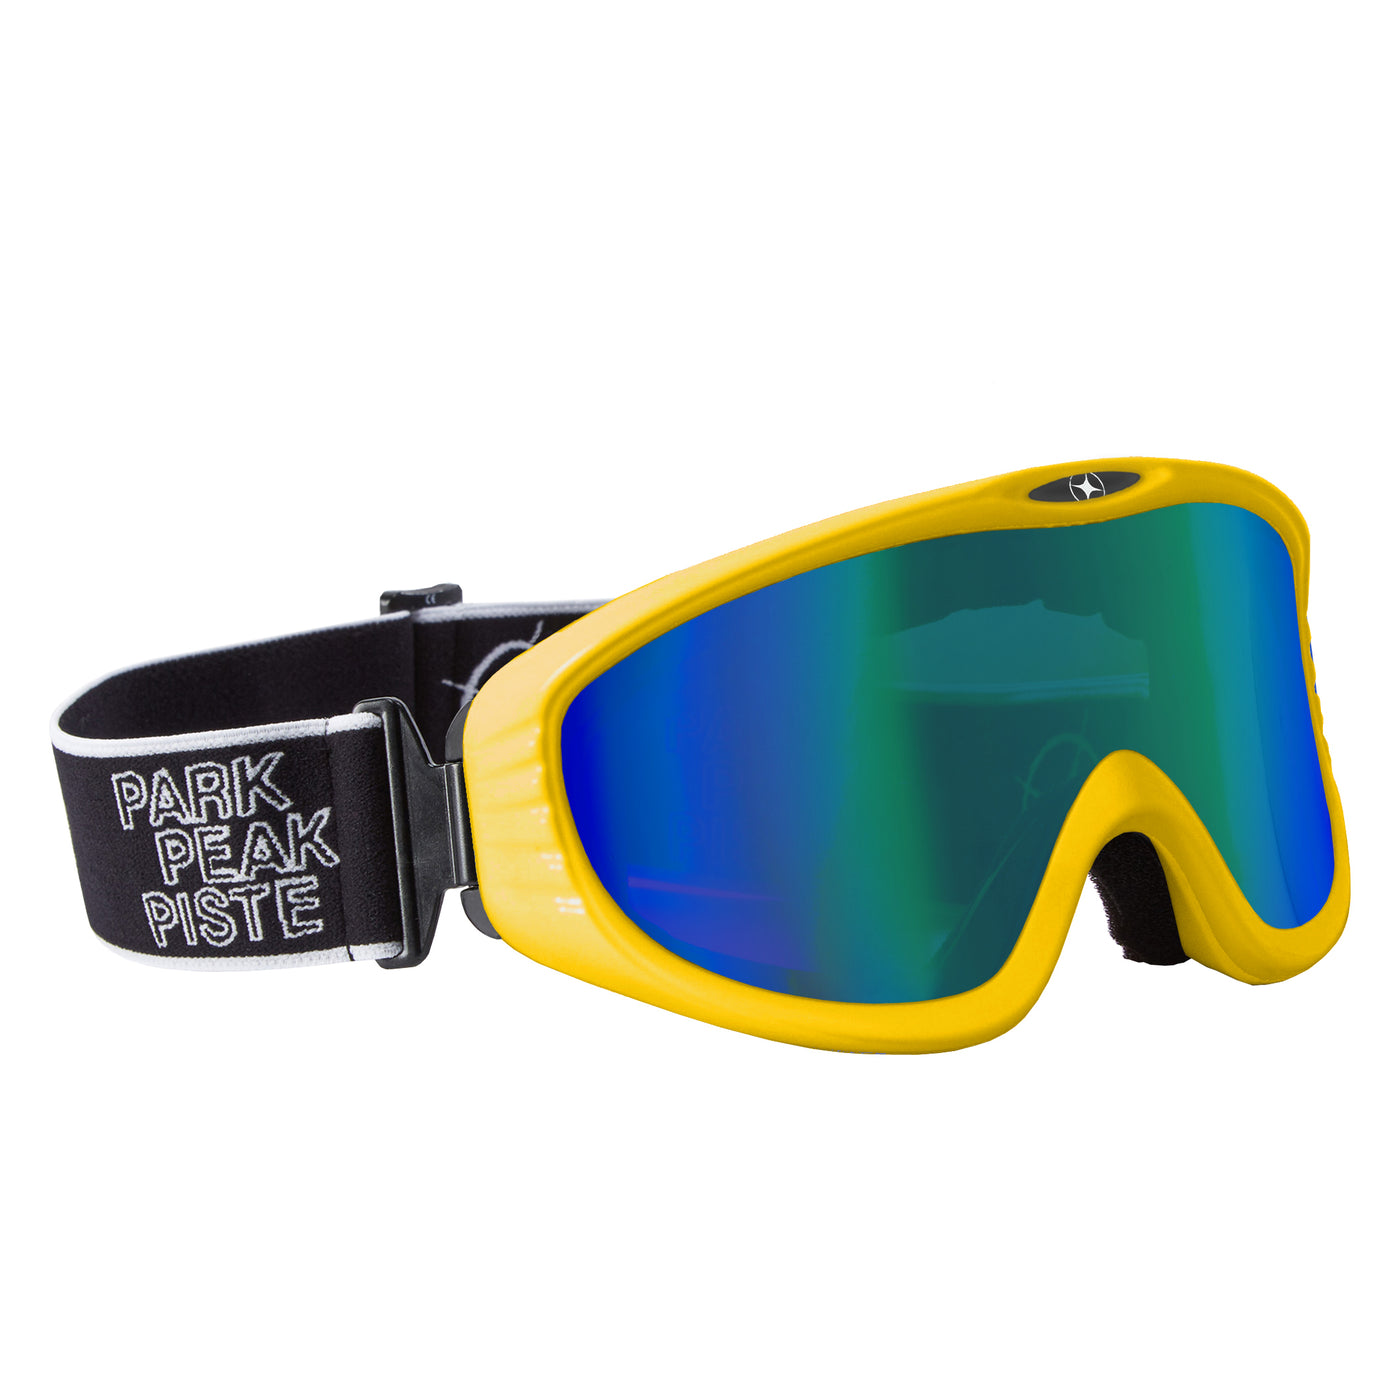 Manbi-PPP Adult Vulcan Goggle Yellow Gloss/Blue Mirror - DISCONTINUED